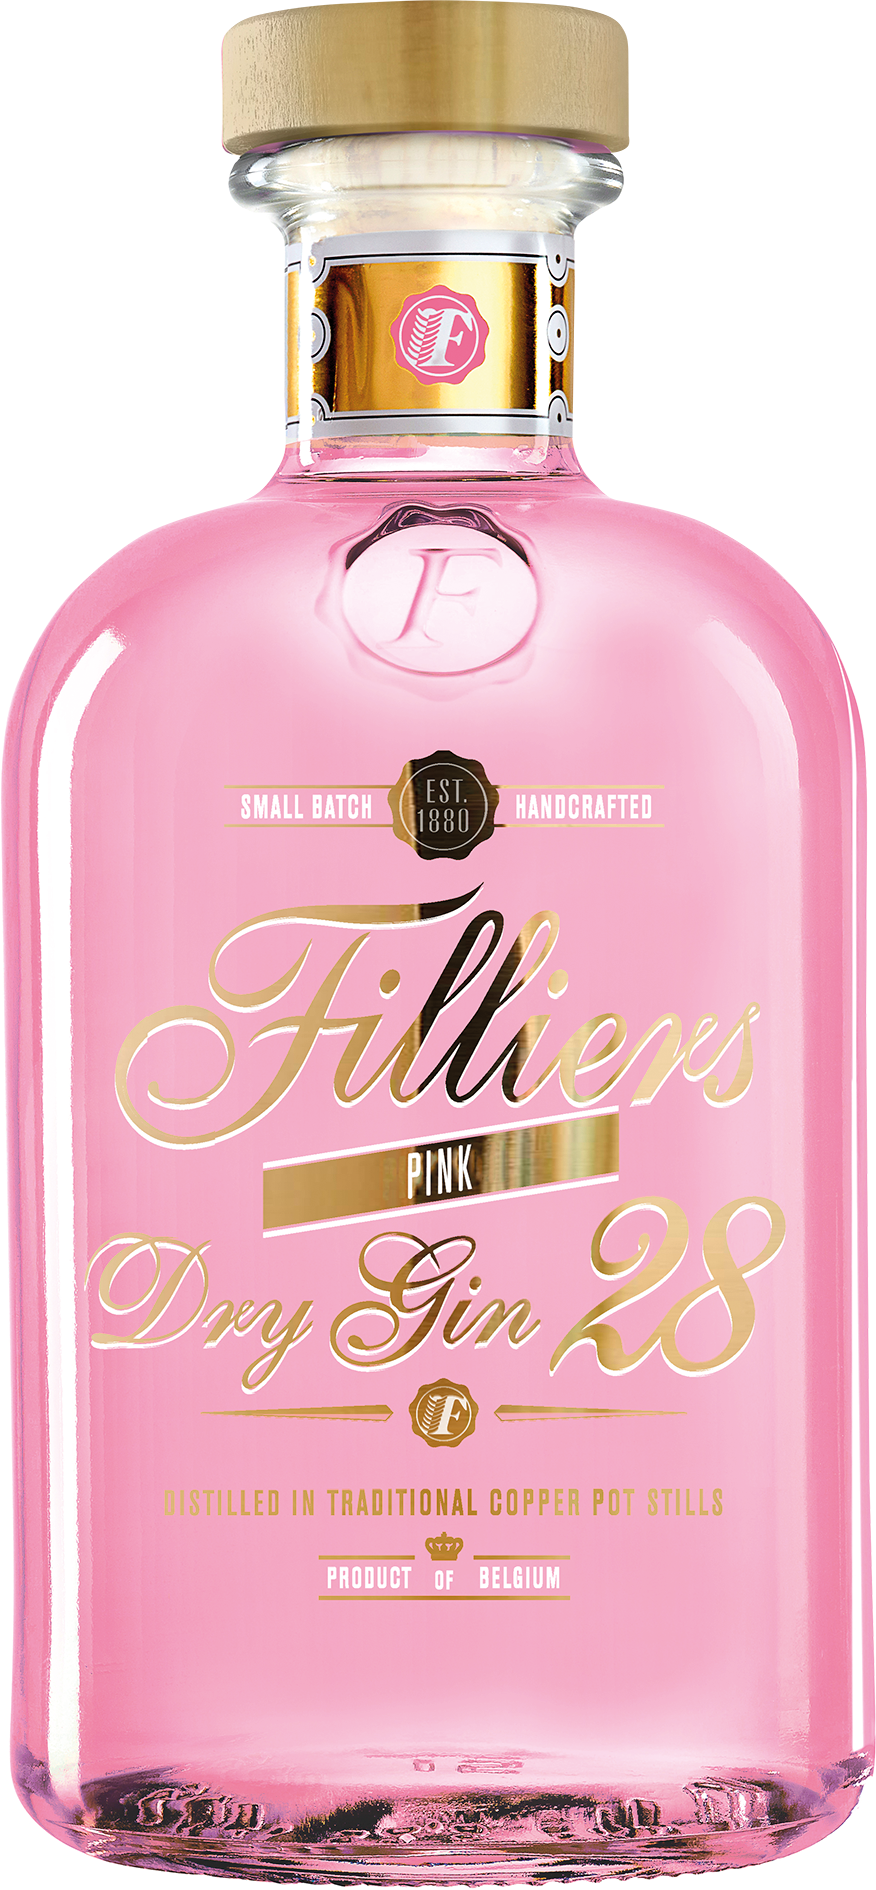 Flasche Filliers Gin 28 Pink